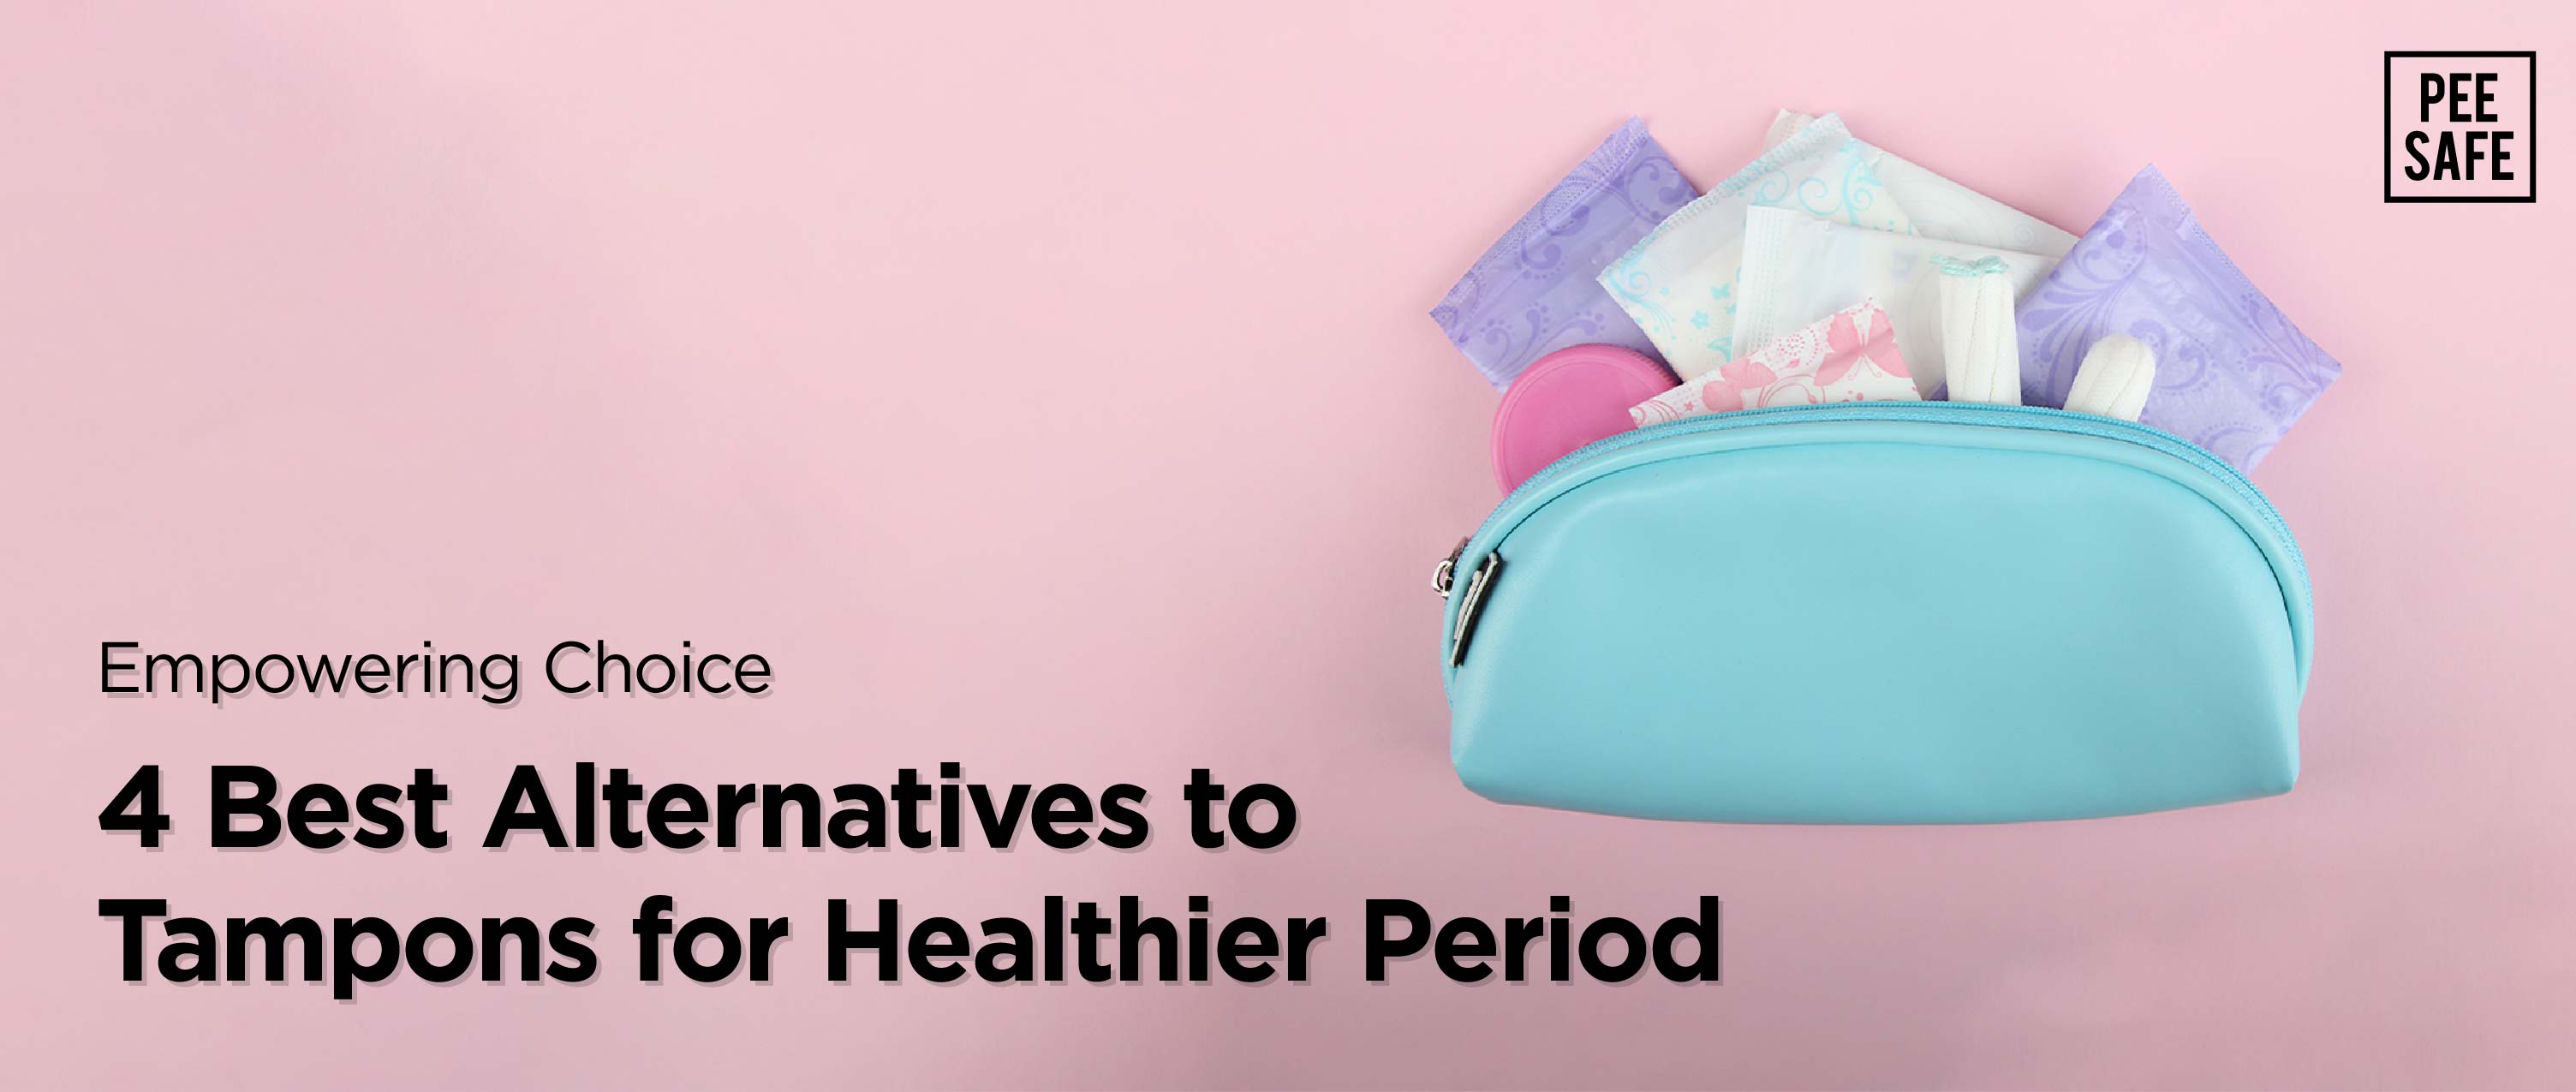 Empowering Choice: 4 Best Alternatives to Tampons for Healthier Period